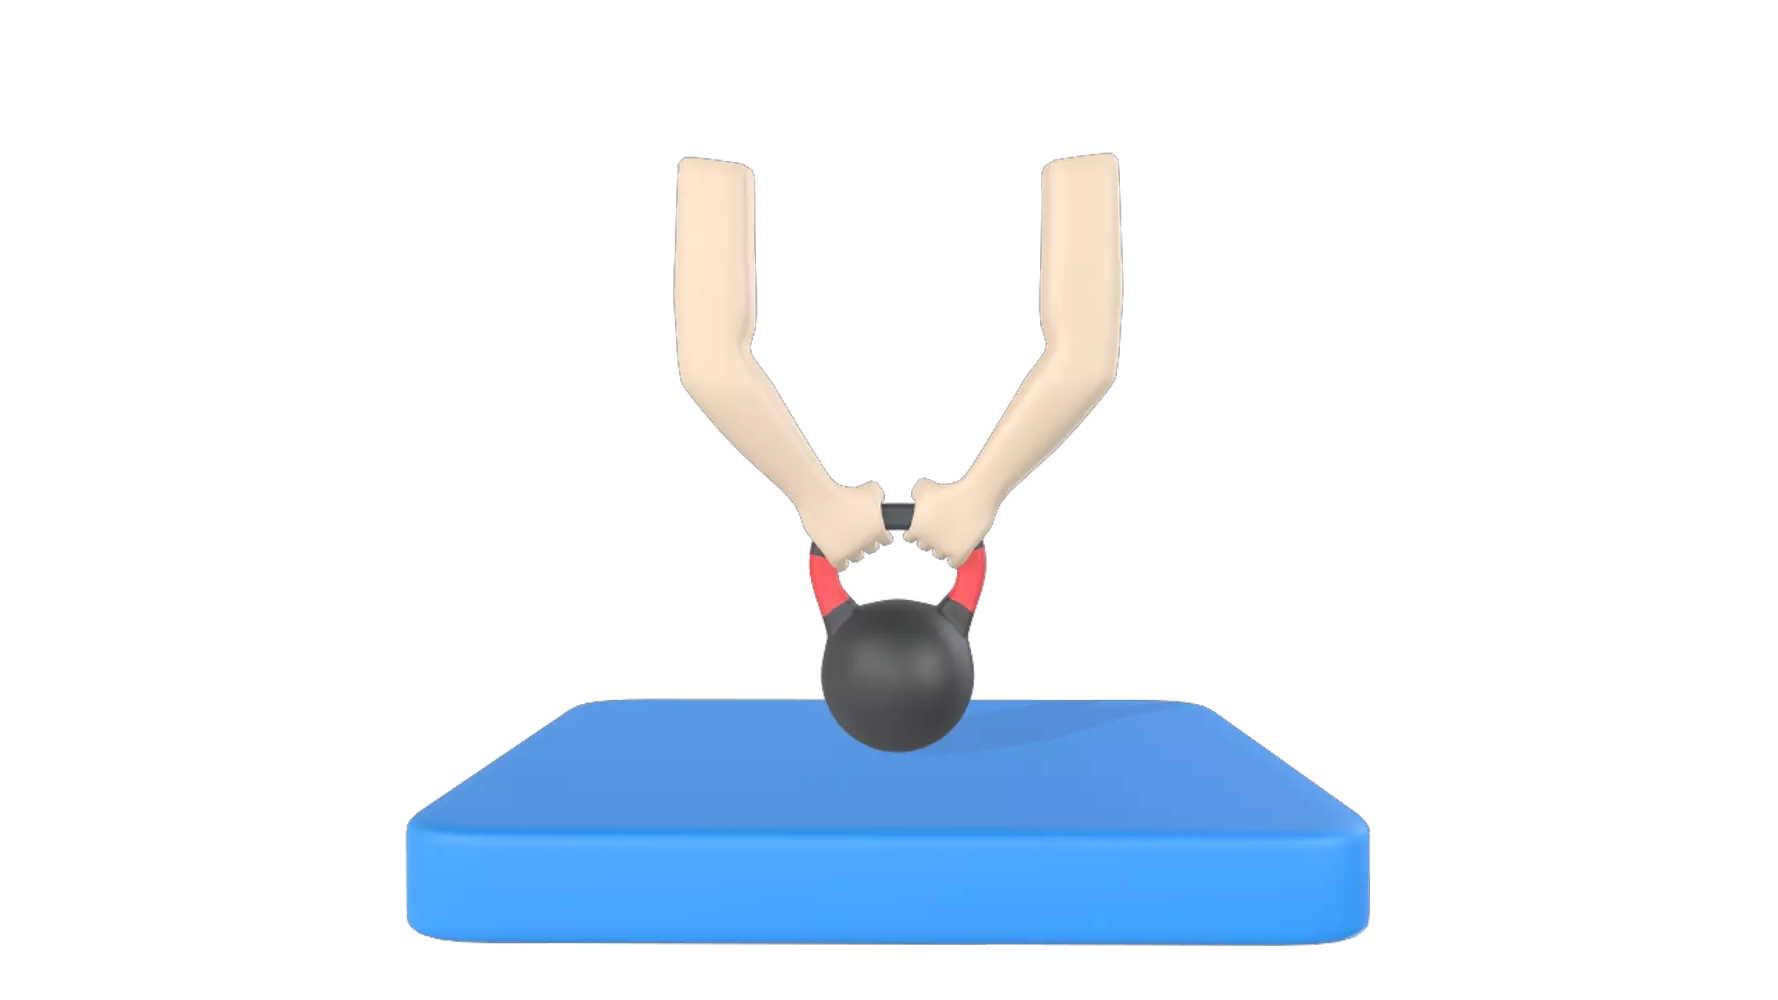 Kettlebell Lifting 3D Graphic